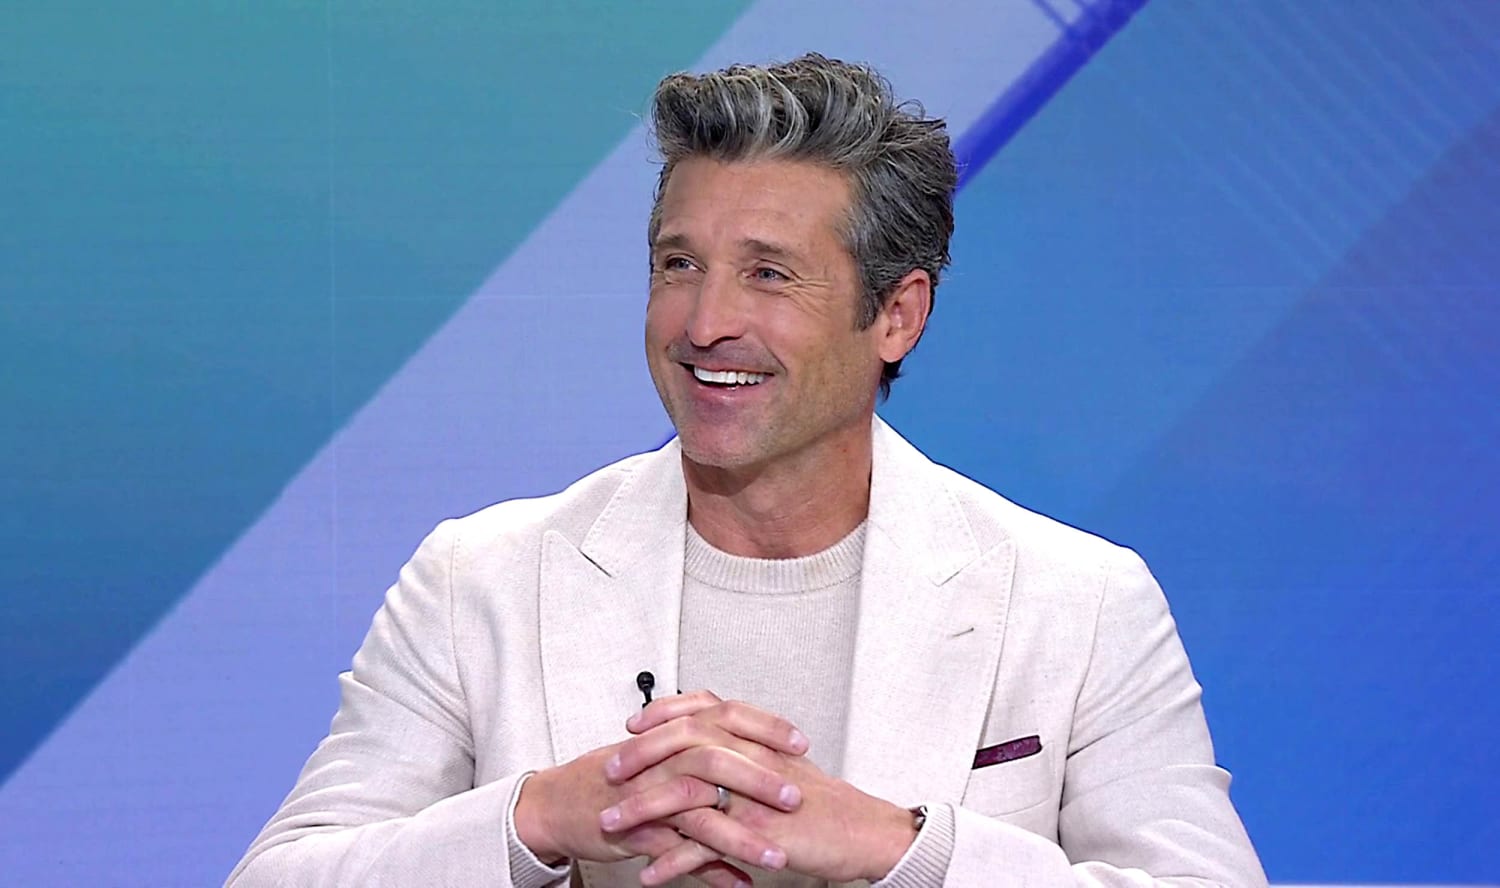 Patrick Dempsey, 57, jokes he's 'grateful for the attention' as People's Sexiest Man Alive